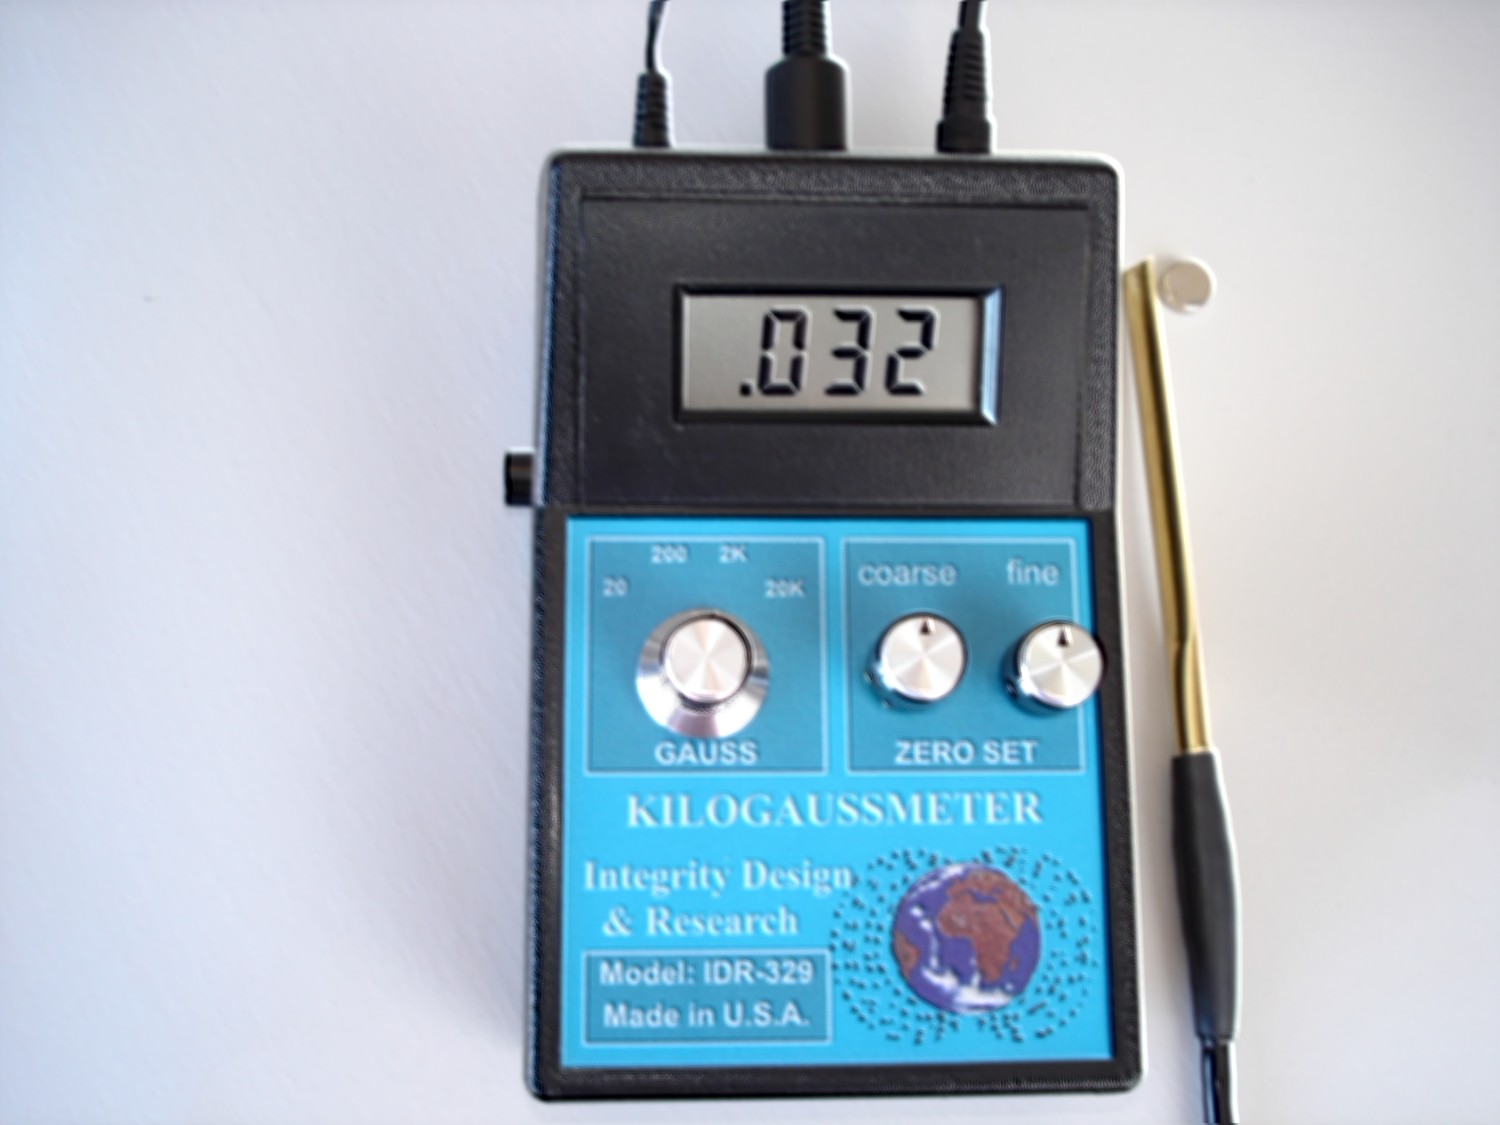 A picture of the DC hall-effect Kilogaussmeter IDR-329-T, magnet measurement